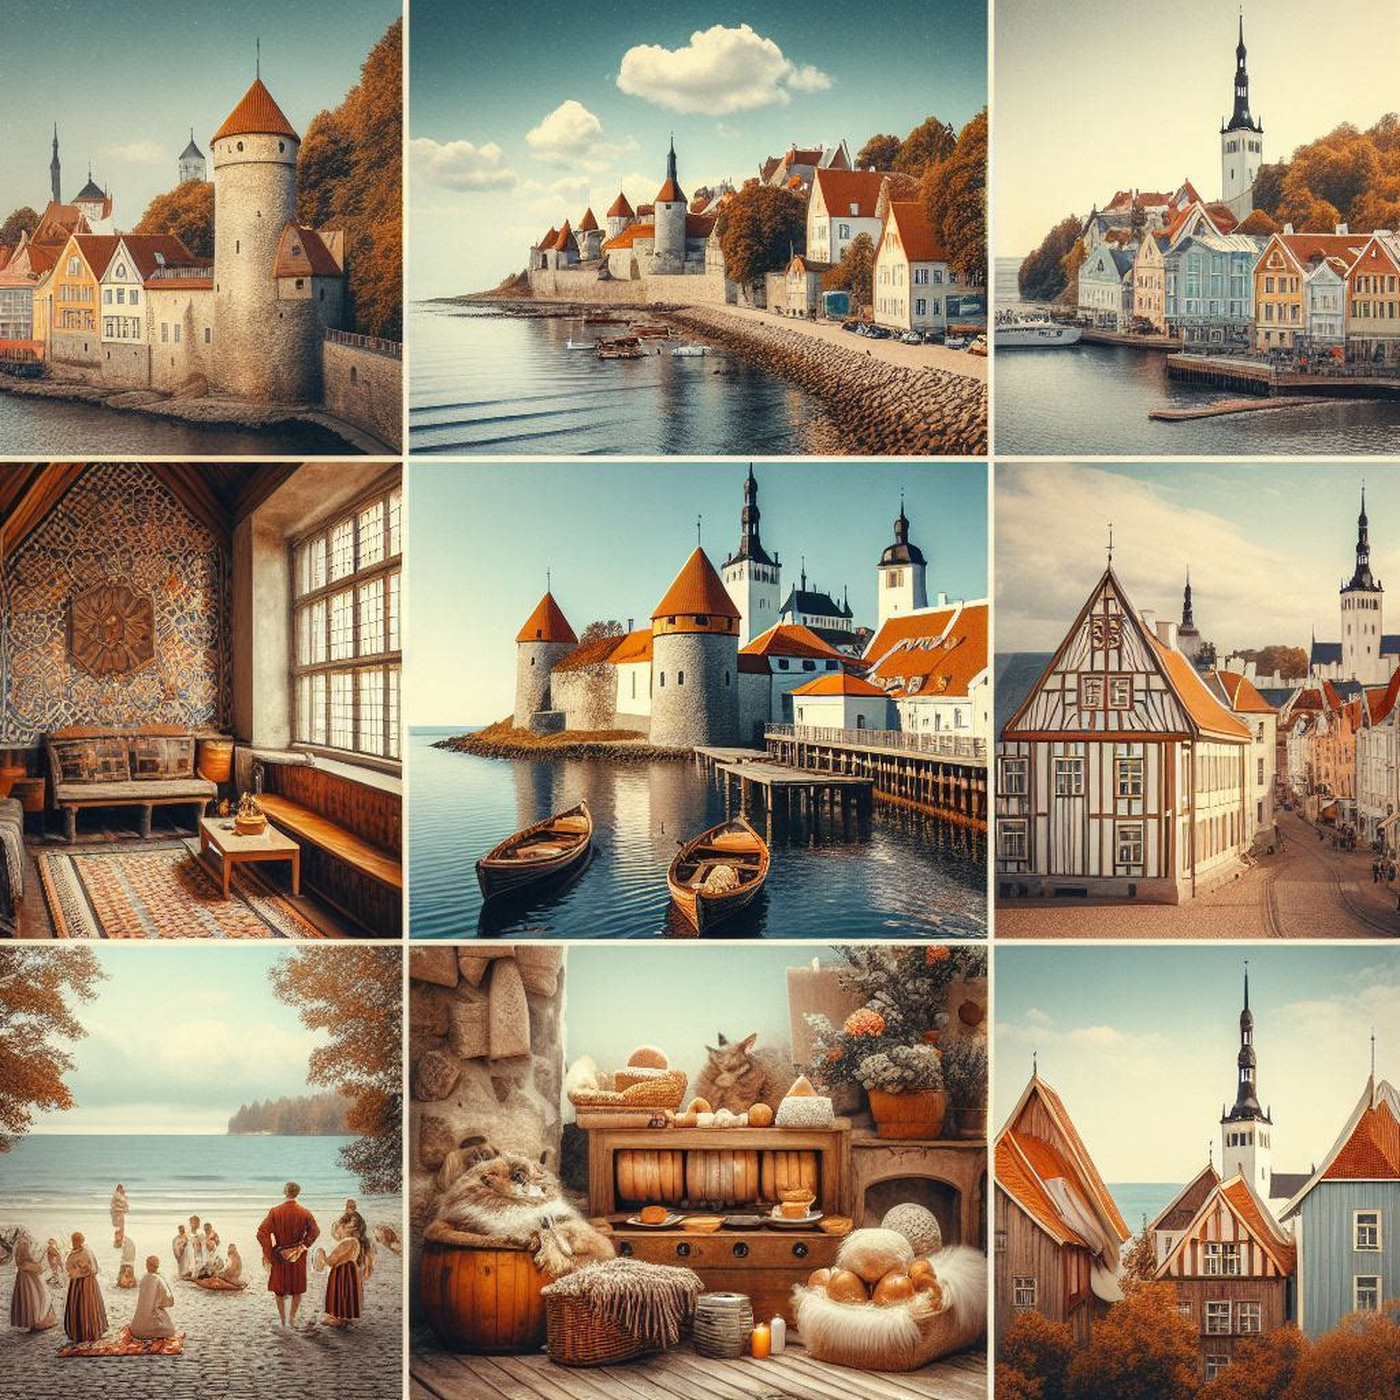 Visiting Estonia? Here's a Guide to Travel like a Local